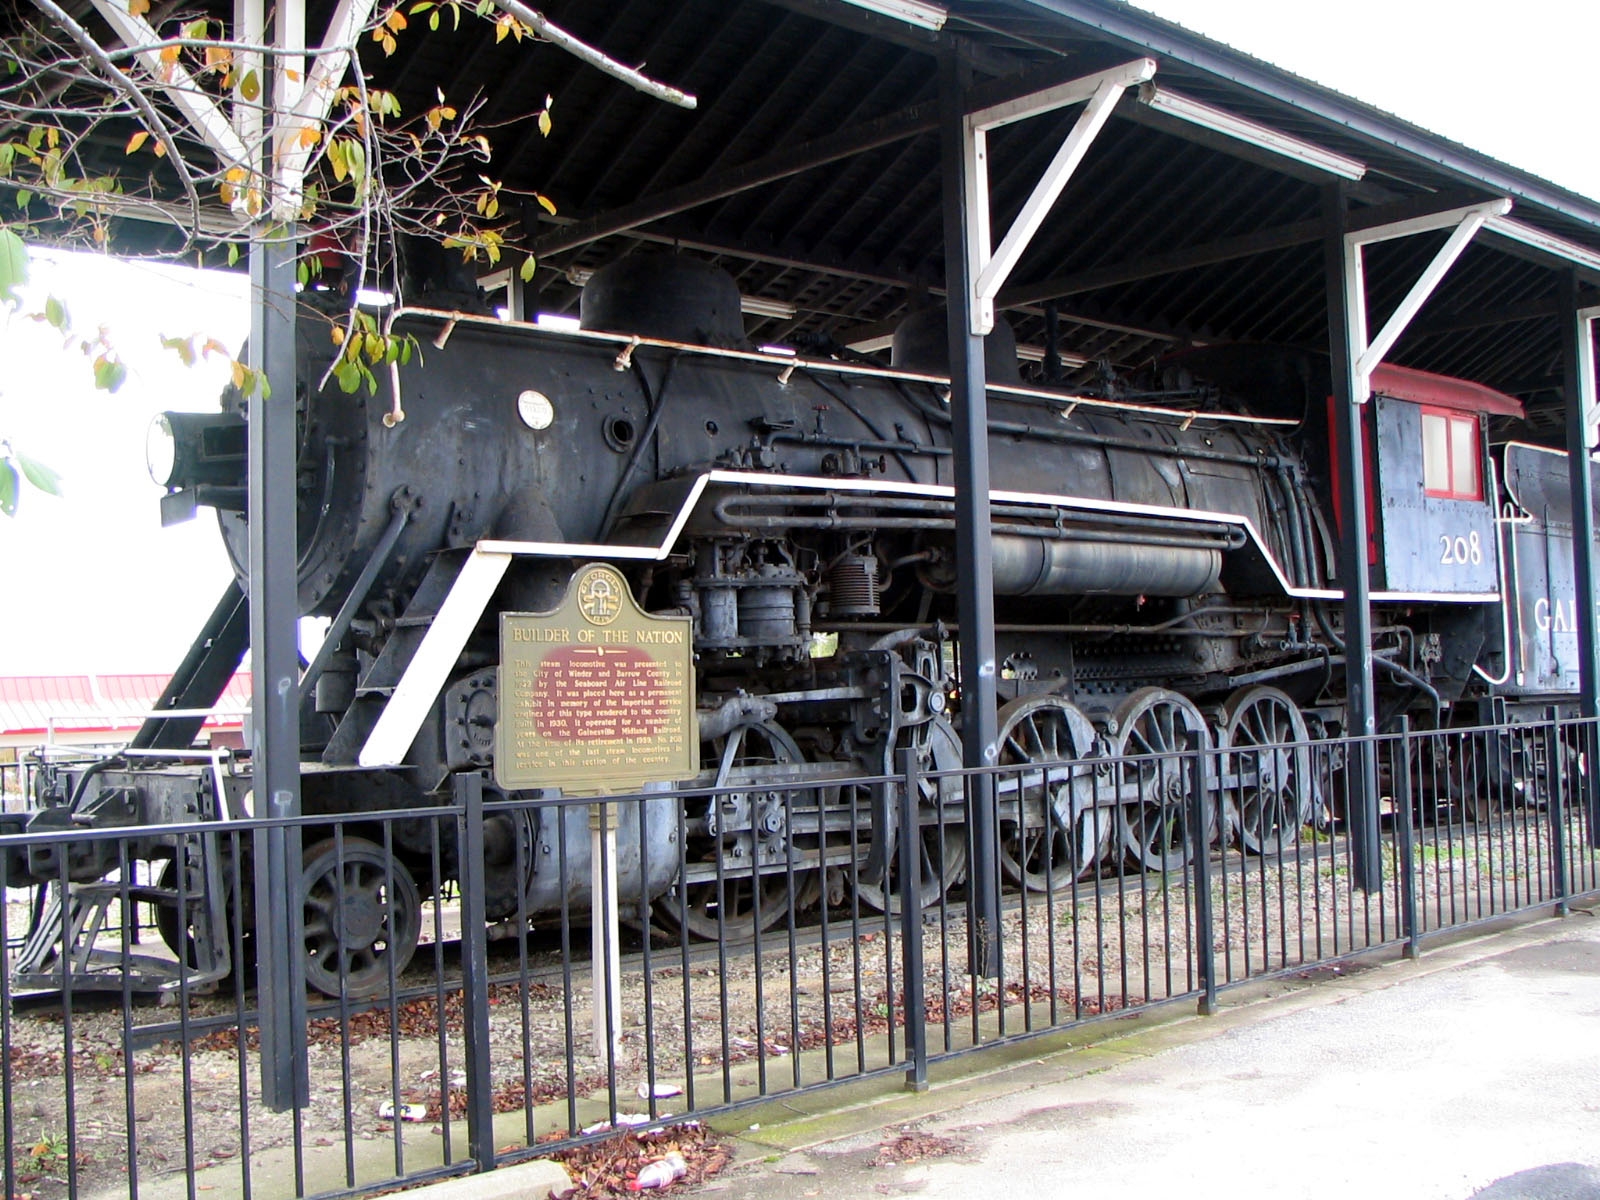 Builder of the Nation Marker and Engine No. 208